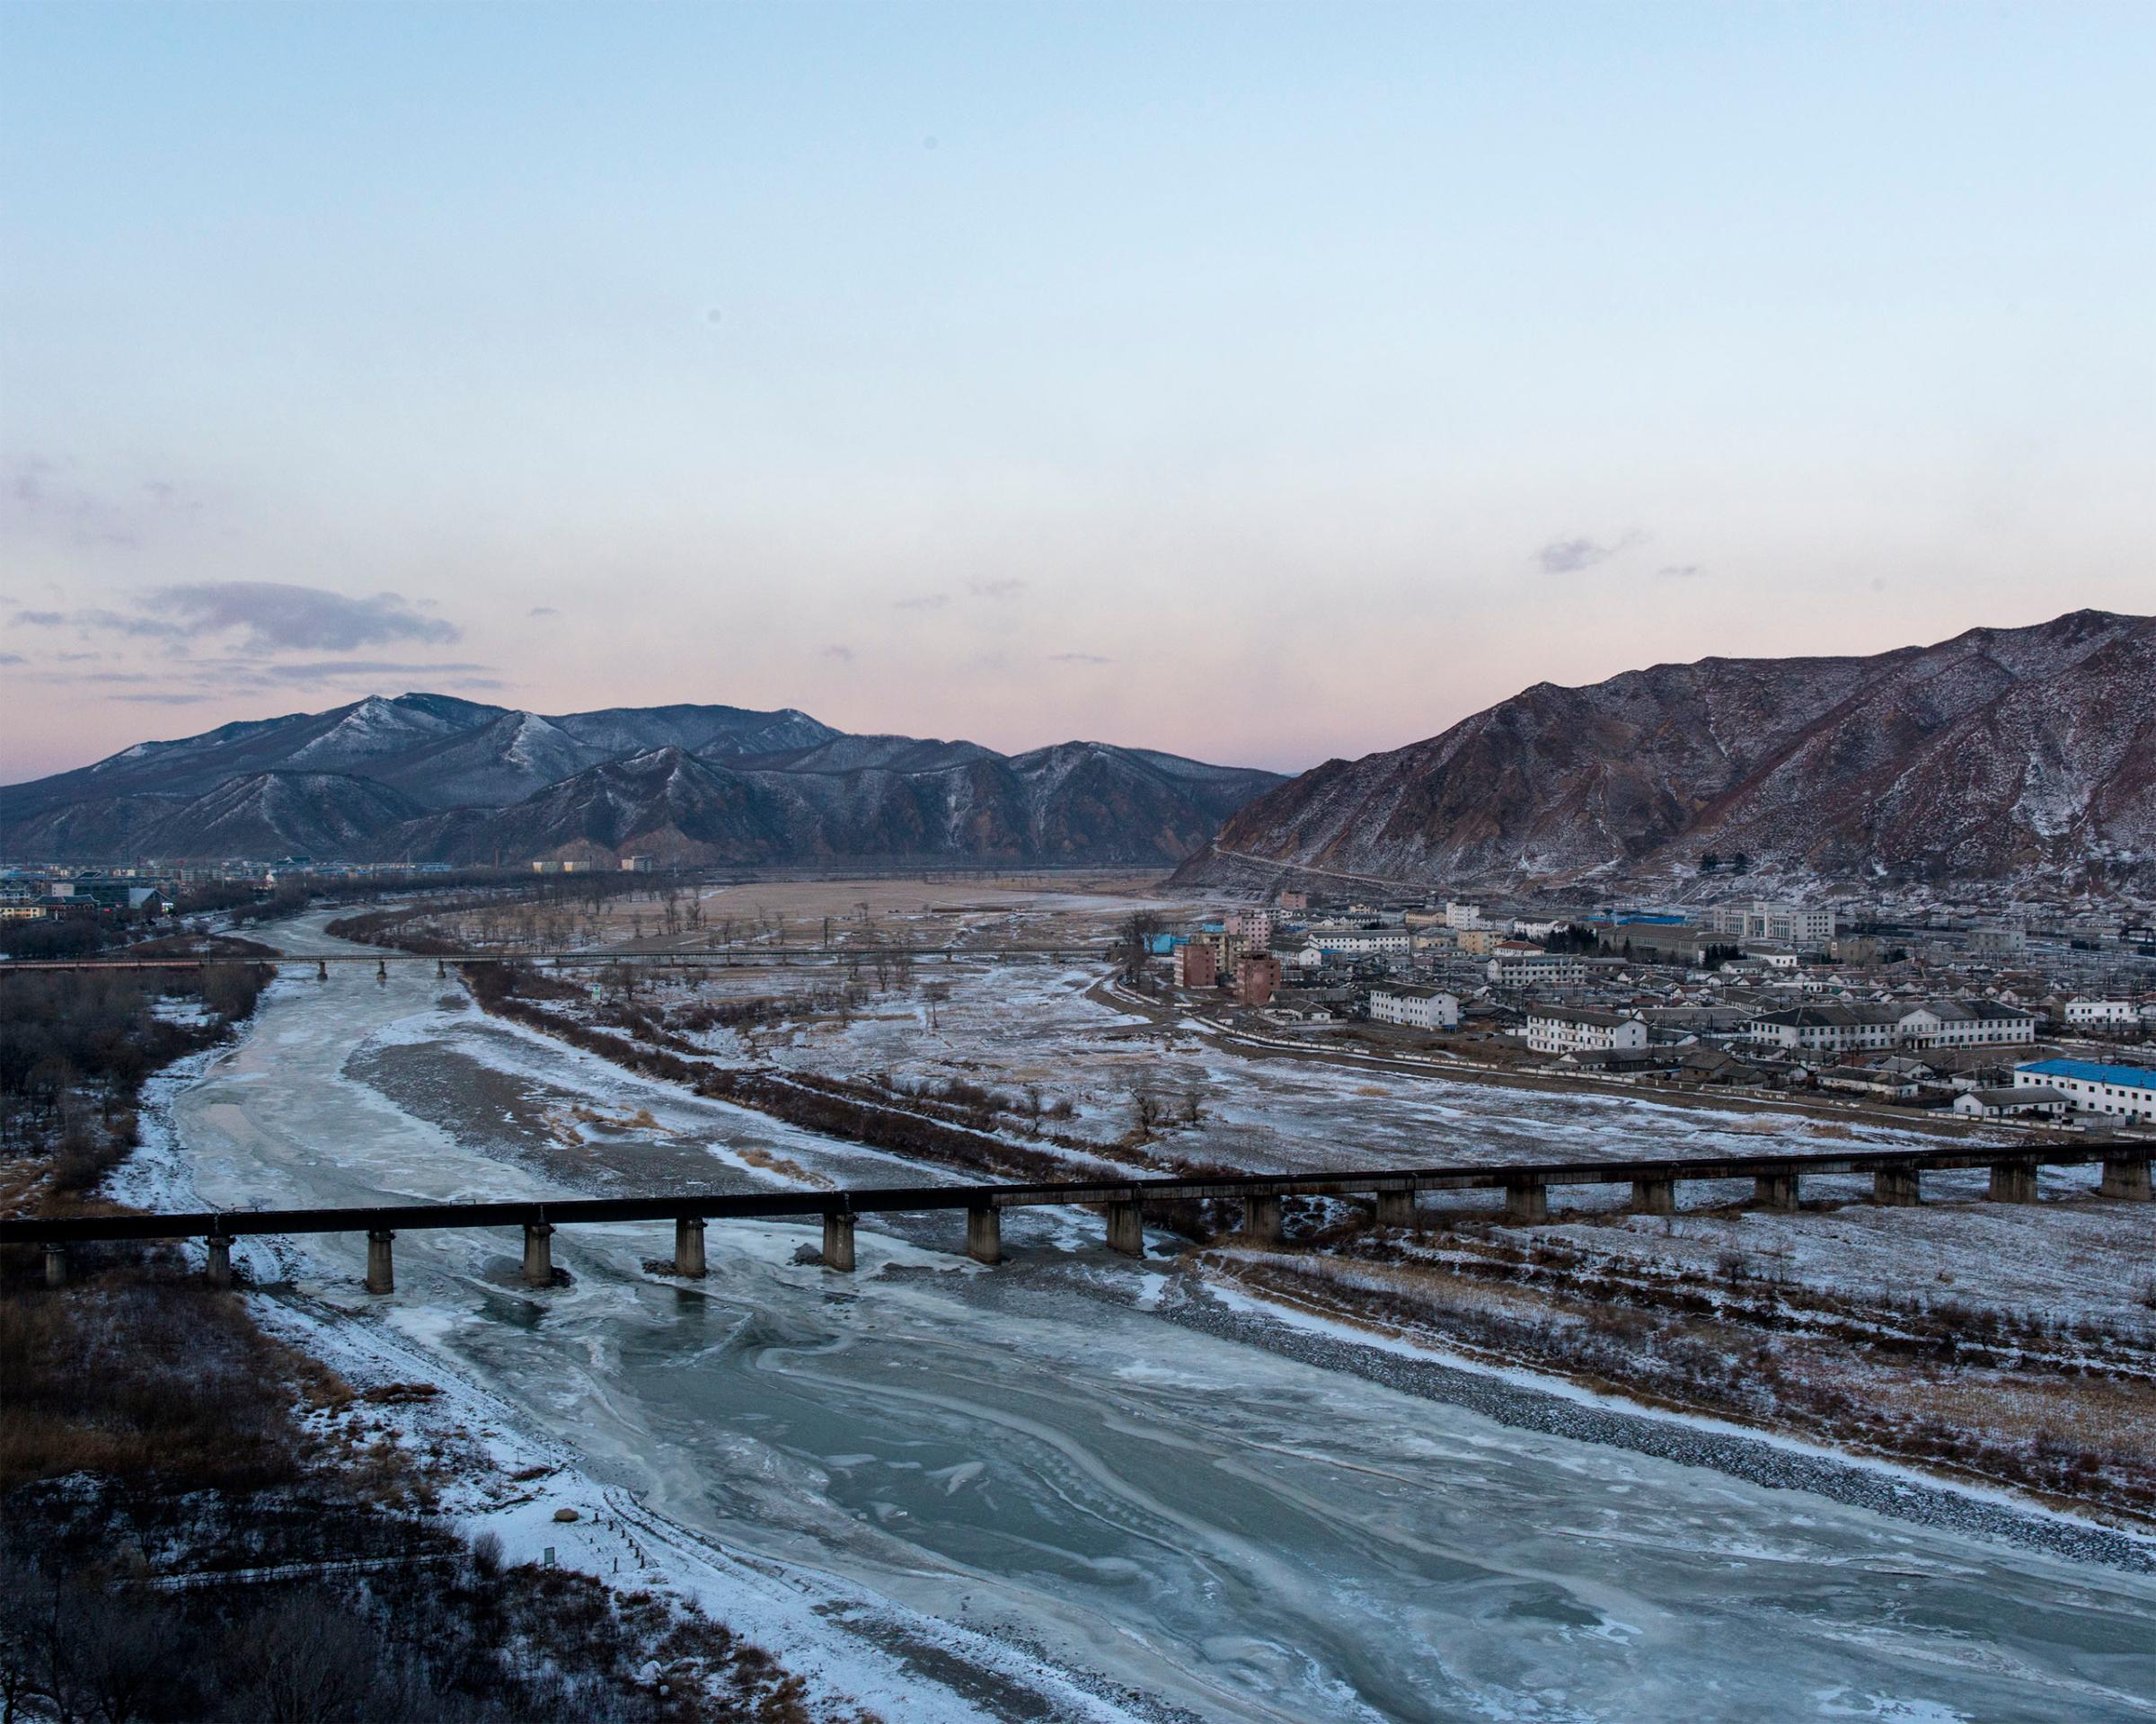 A view of the Tumen river which separates Tumen, China from Namyang, Onsong county, North Korea, at left. Tumen has a very large population of ethnic Koreans, and a detention center for captured North Koreans awaiting deportation.